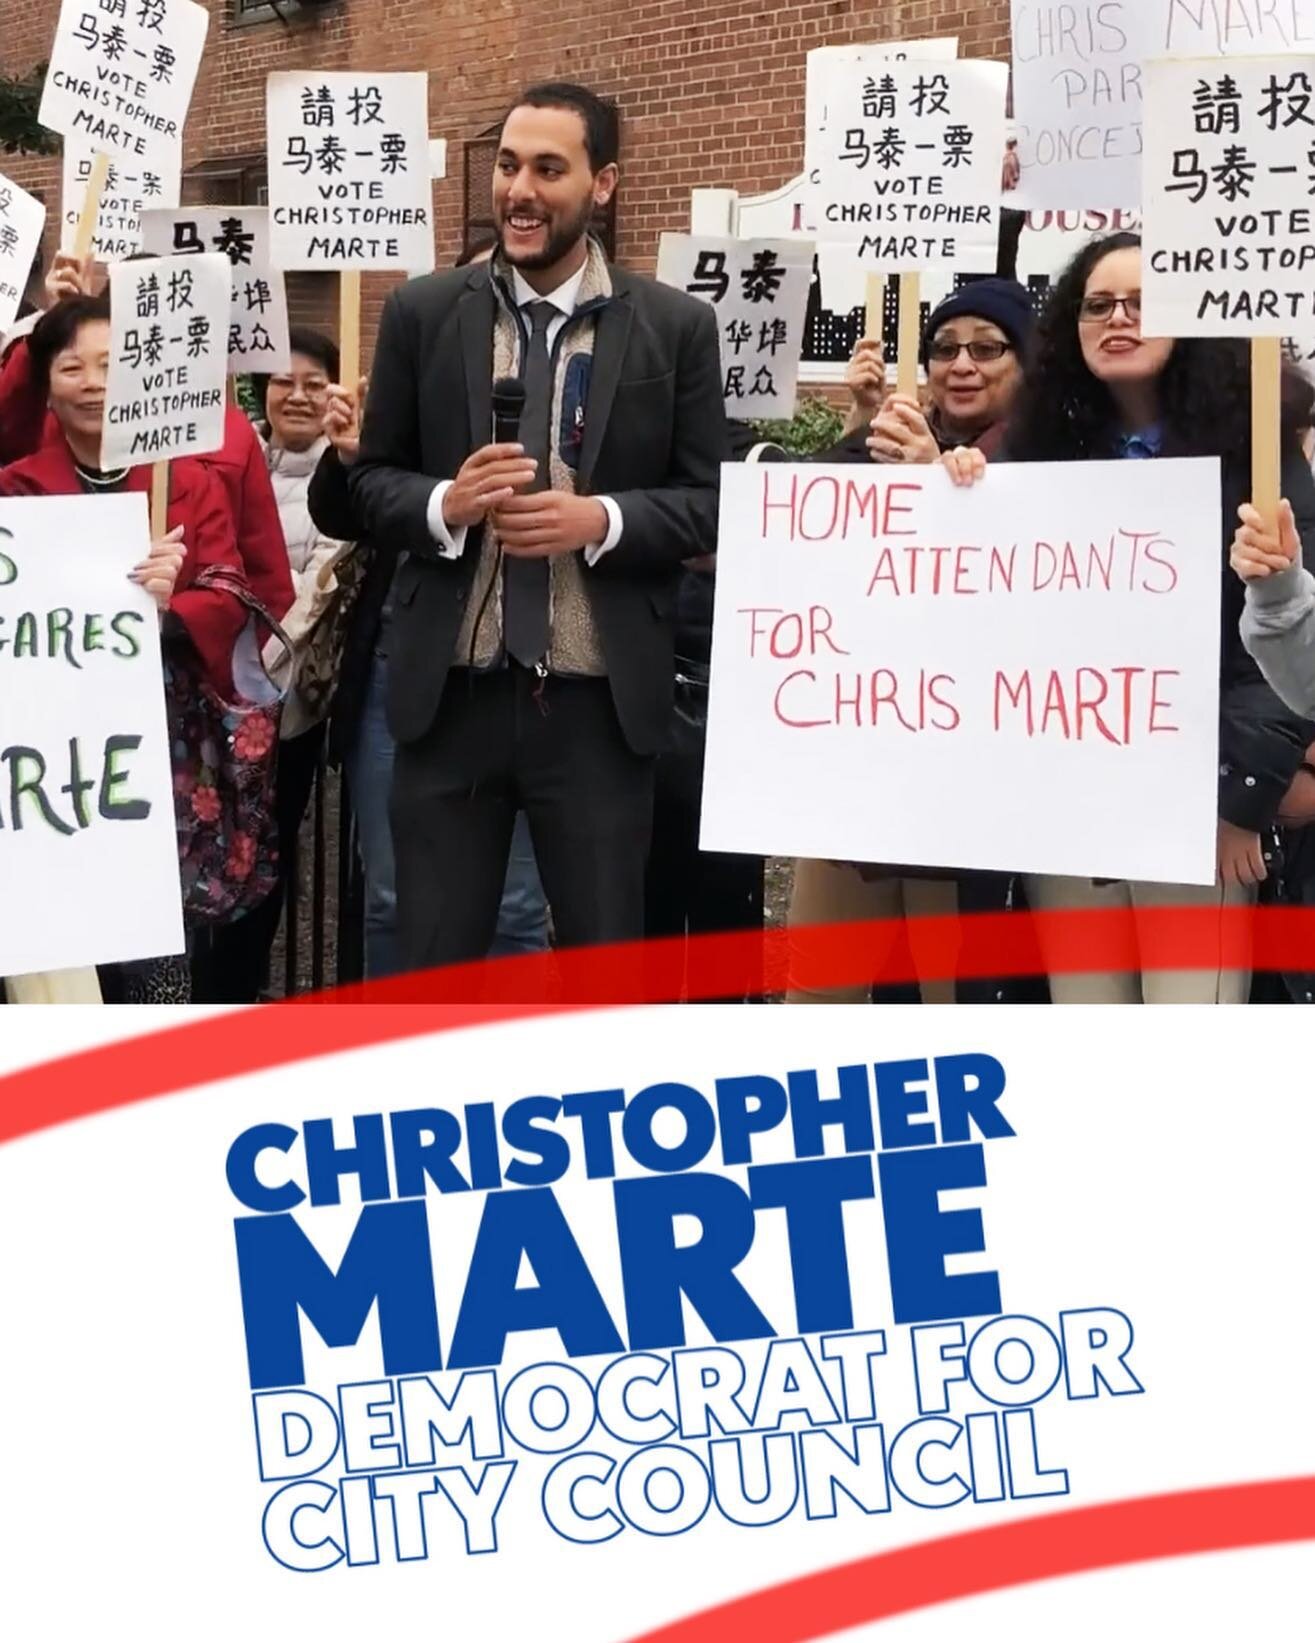 LOWER MANHATTAN RESIDENTS IT&rsquo;S OUR TIME! TOMORROW TUESDAY 6/22 is a HUGE day for Lower Manhattan, and we at BEVERLY&rsquo;S could not be more excited to cast our votes for CHRIS MARTE FOR CITY COUNCIL DISTRICT 1!! 

Neighbors in Chinatown, Two 